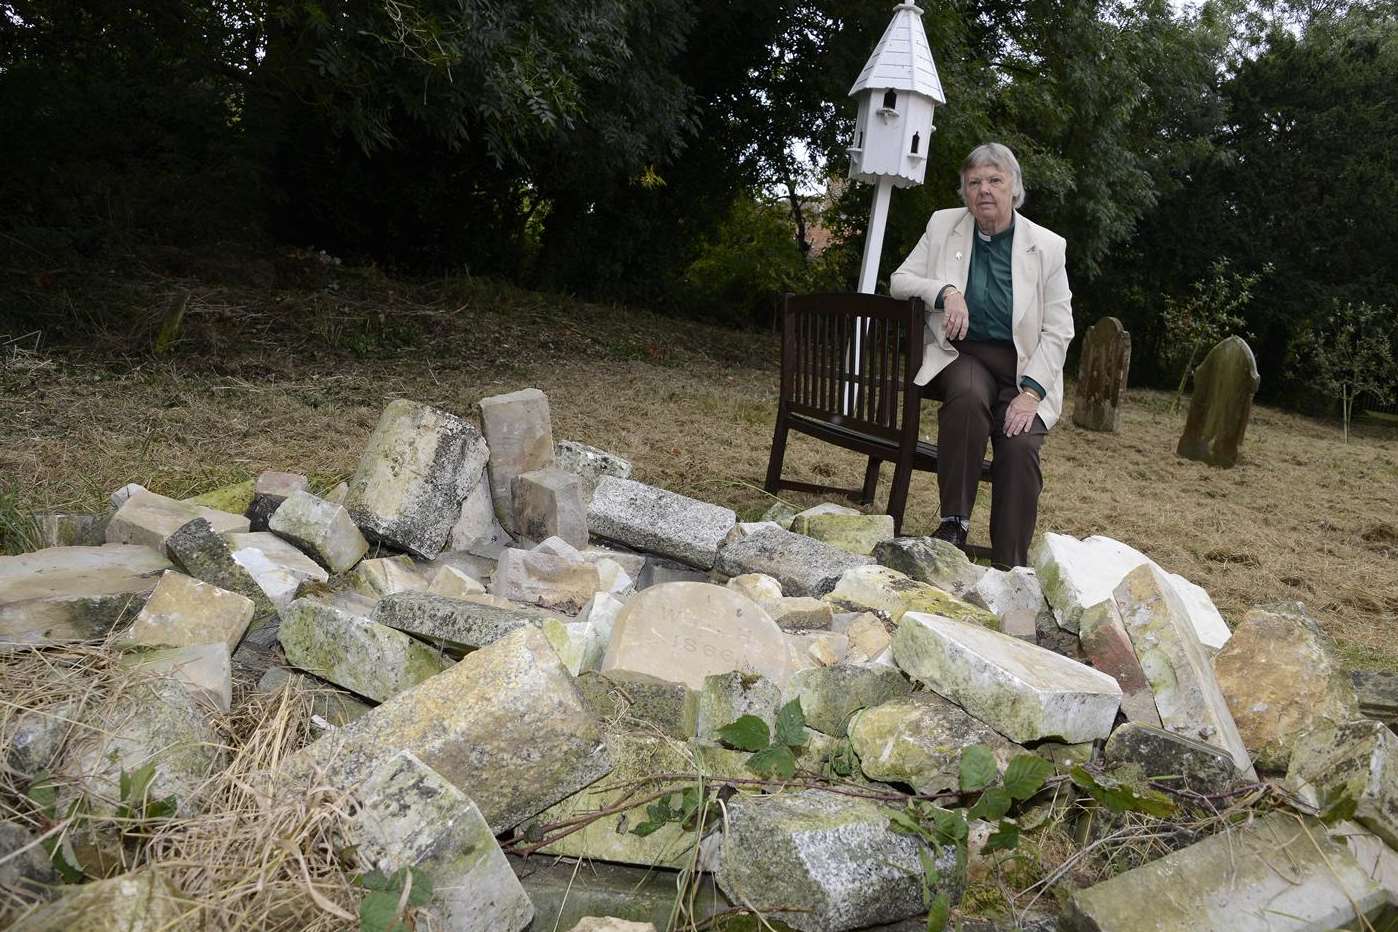 Vandals destroyed the 150 year old memorial